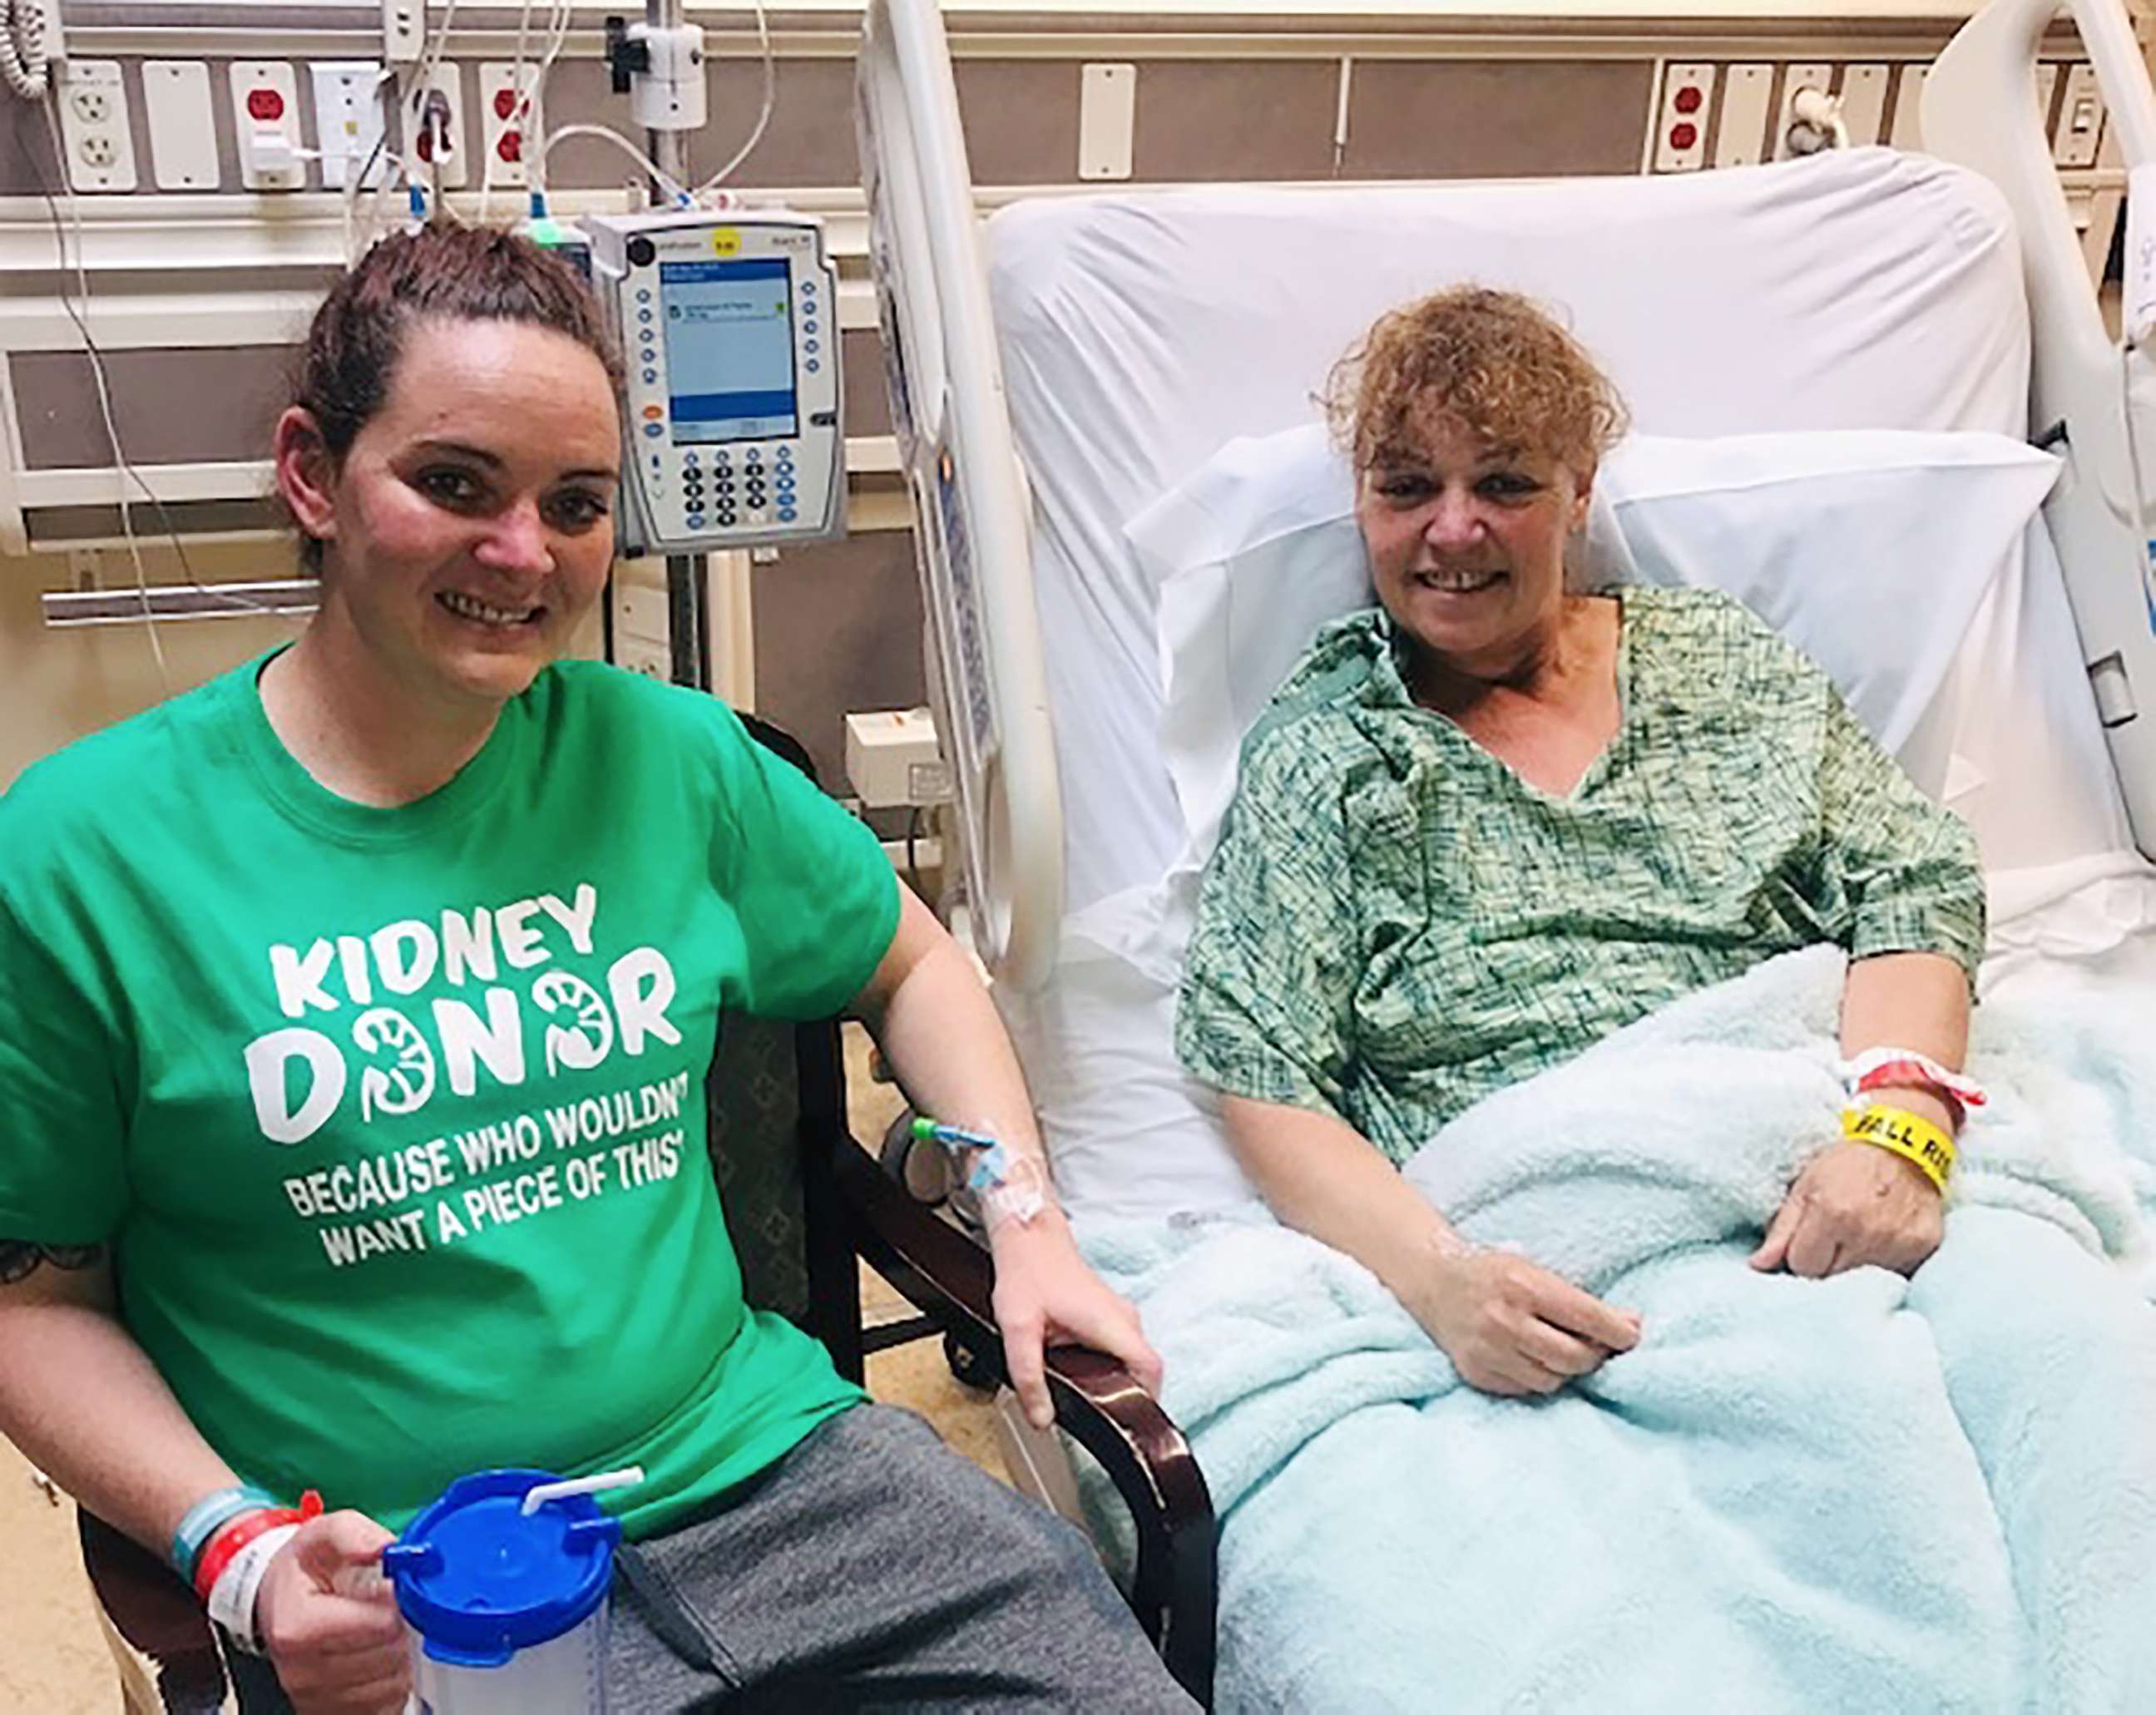 PHOTO: Casey Flory, left, and Debbie Harker pose in the hospital after kidney transplant surgery.